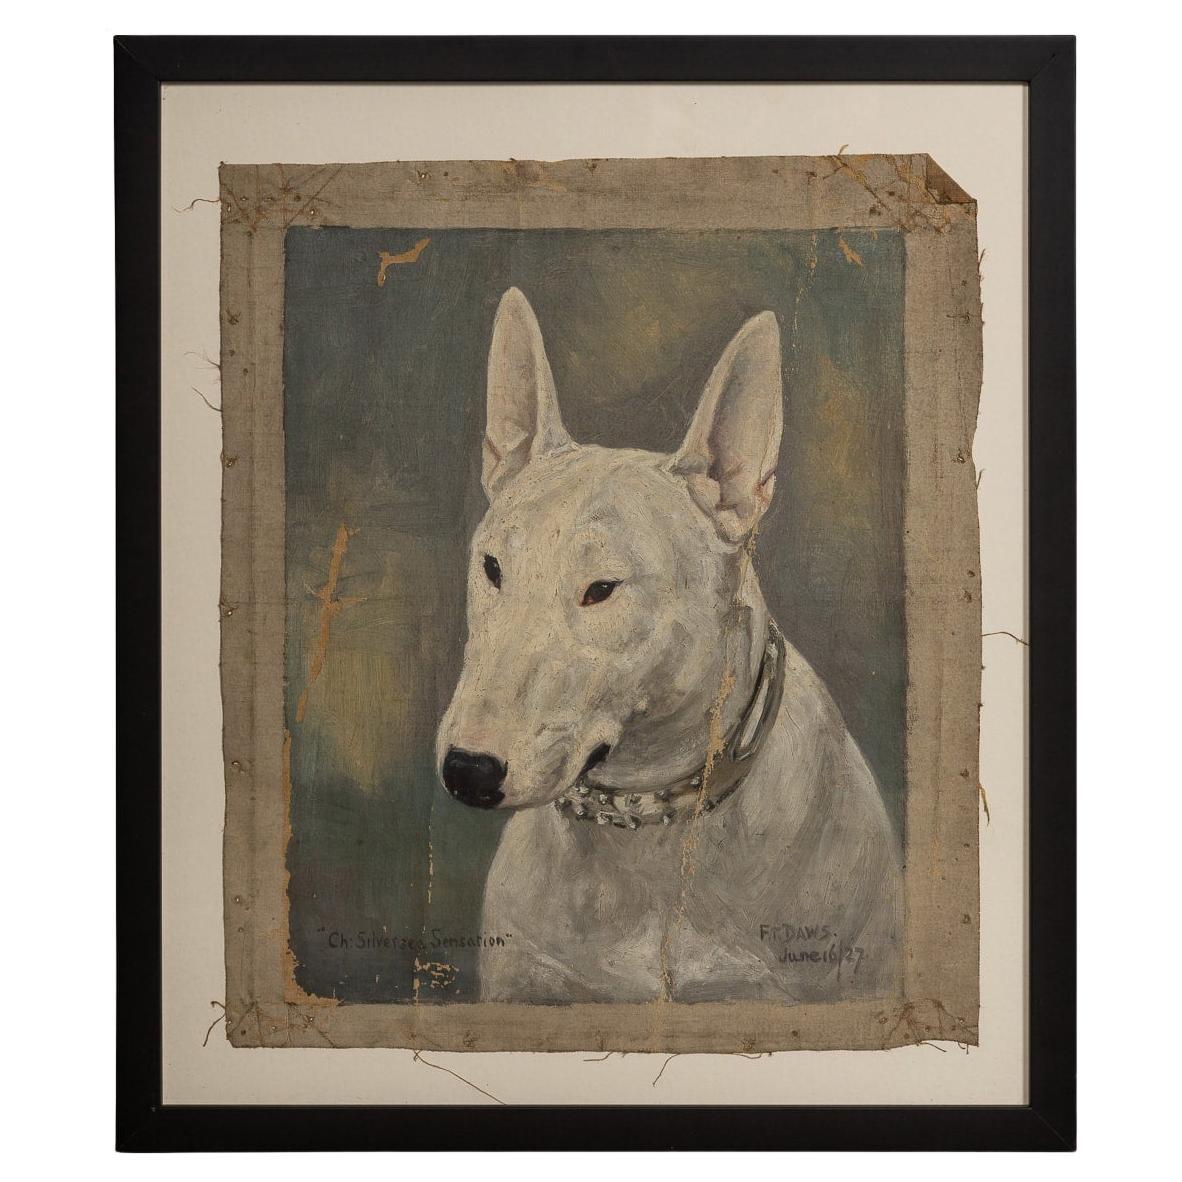 Antique 20thC Framed English Bull Terrier Oil On Canvas By Frederick Thomas Daws